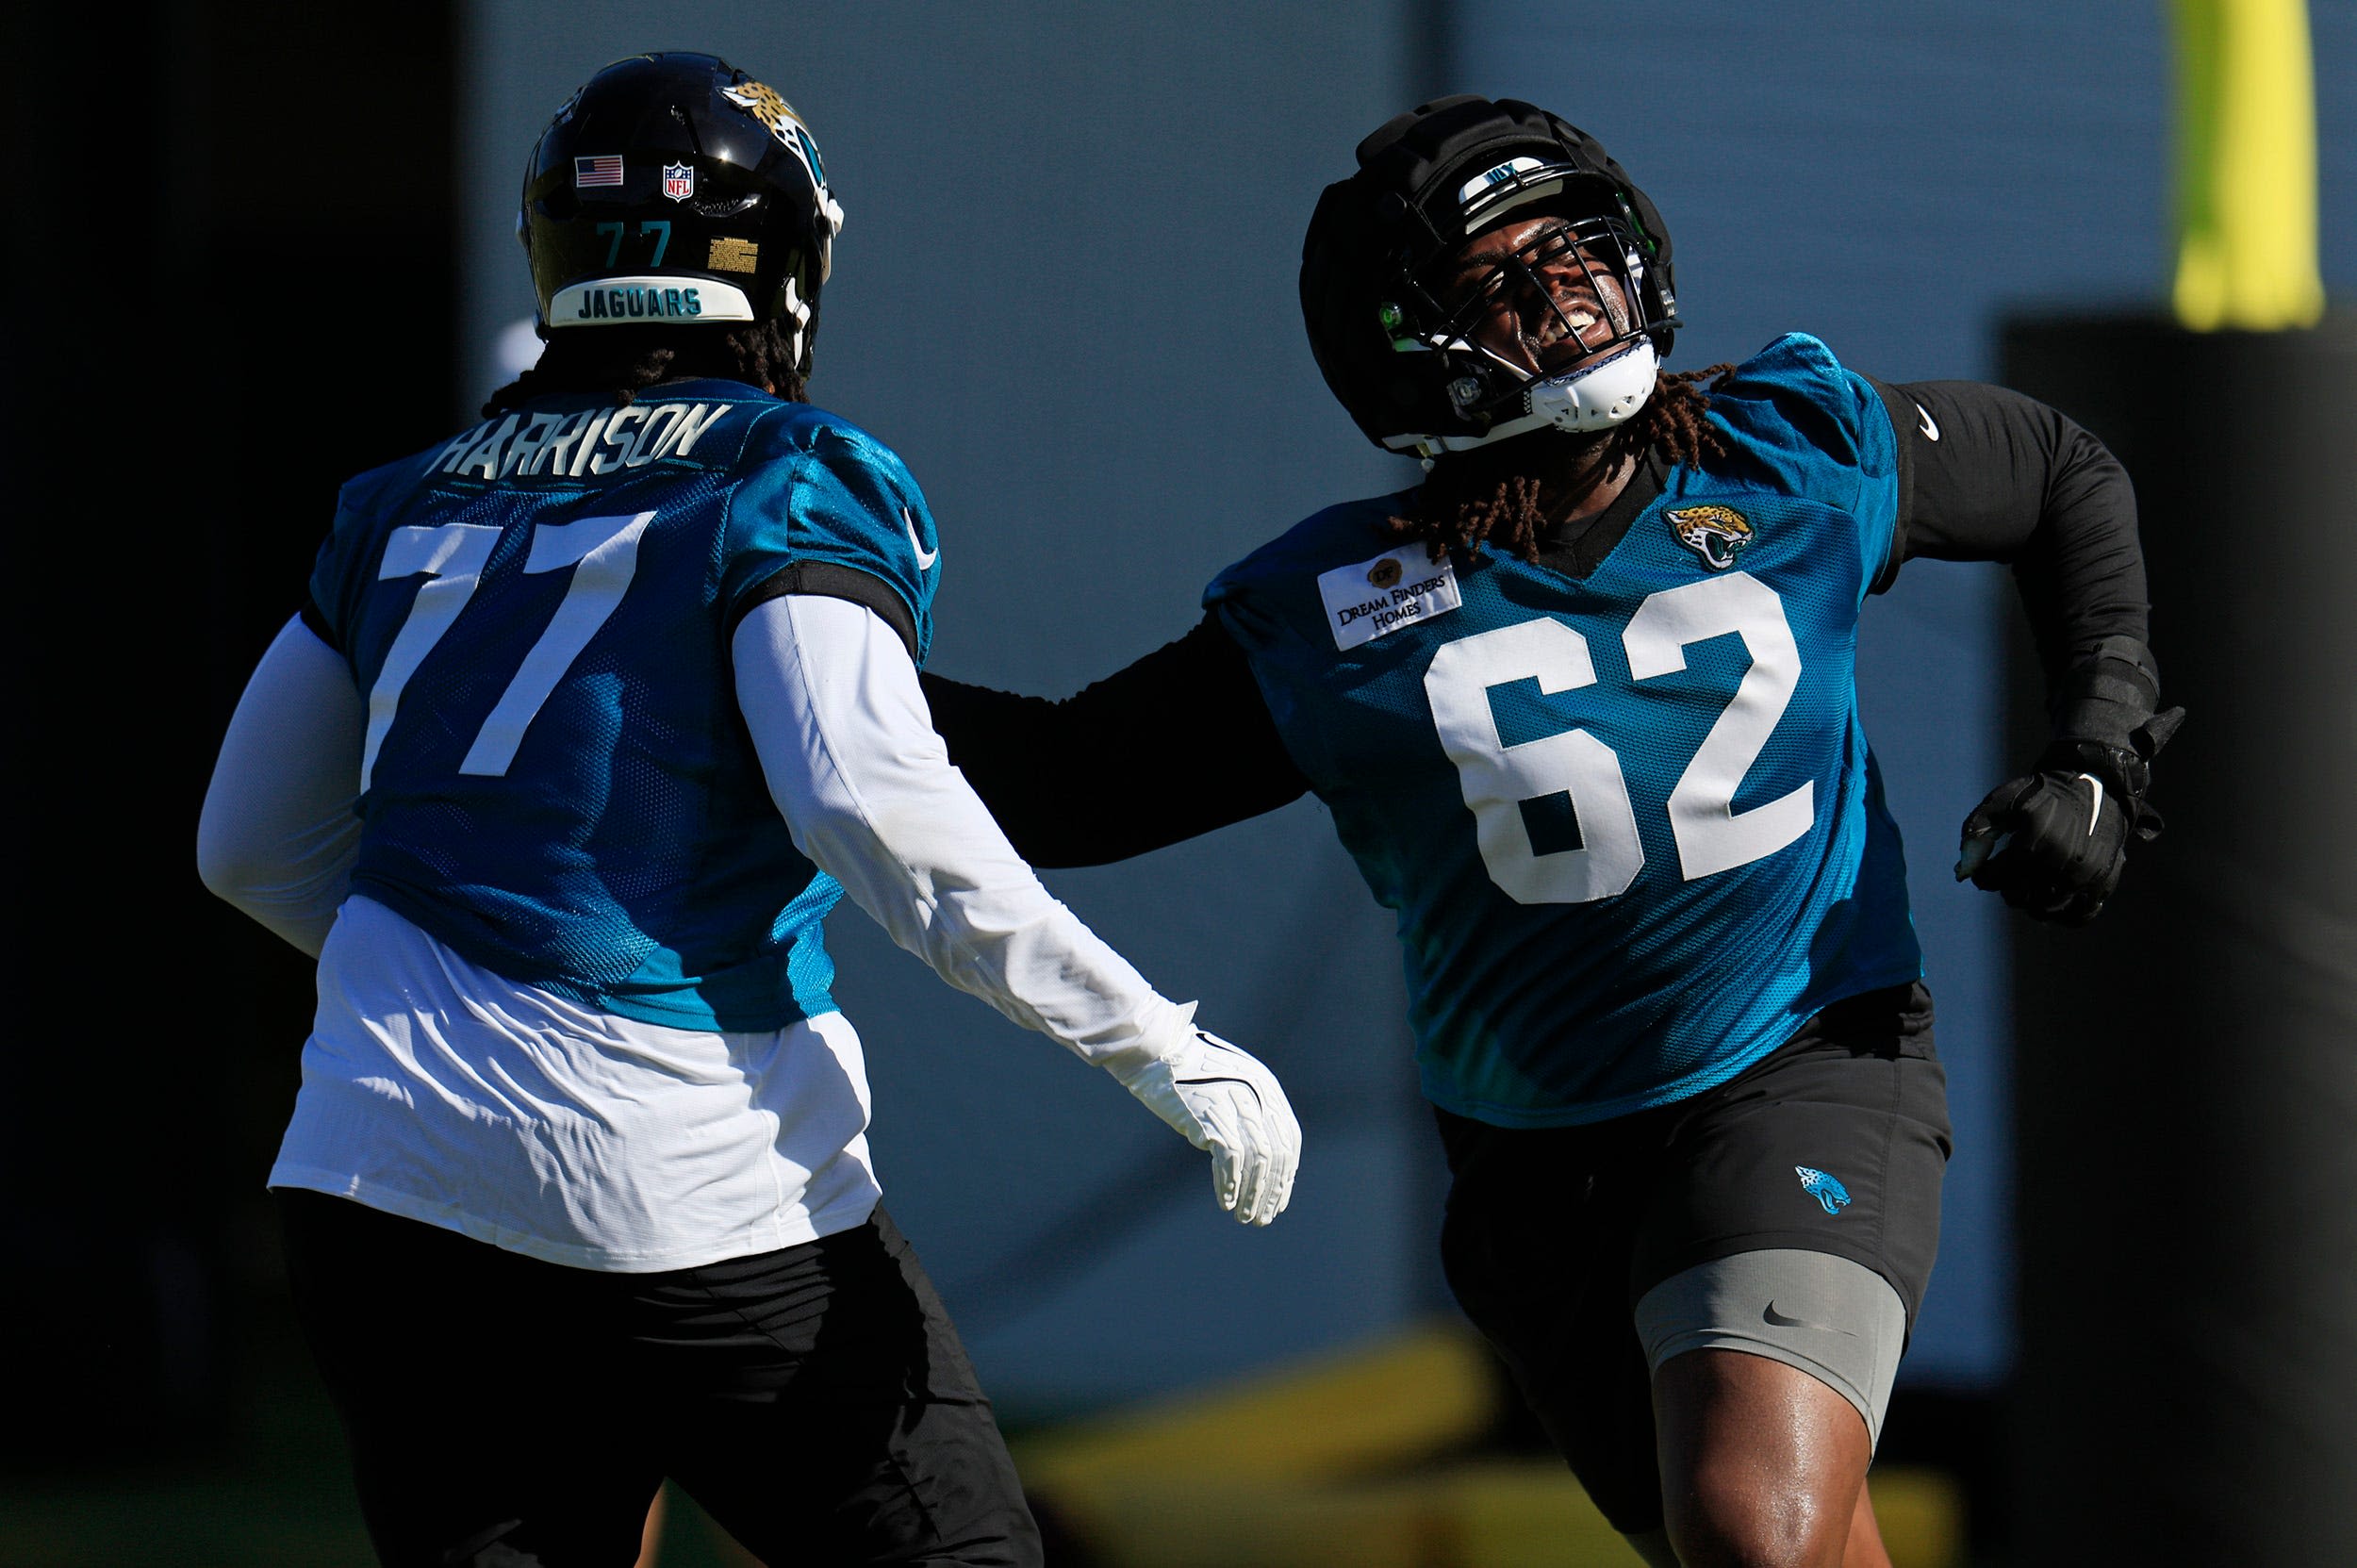 Jacksonville Jaguars defense gets the better of the offense on first day of training camp